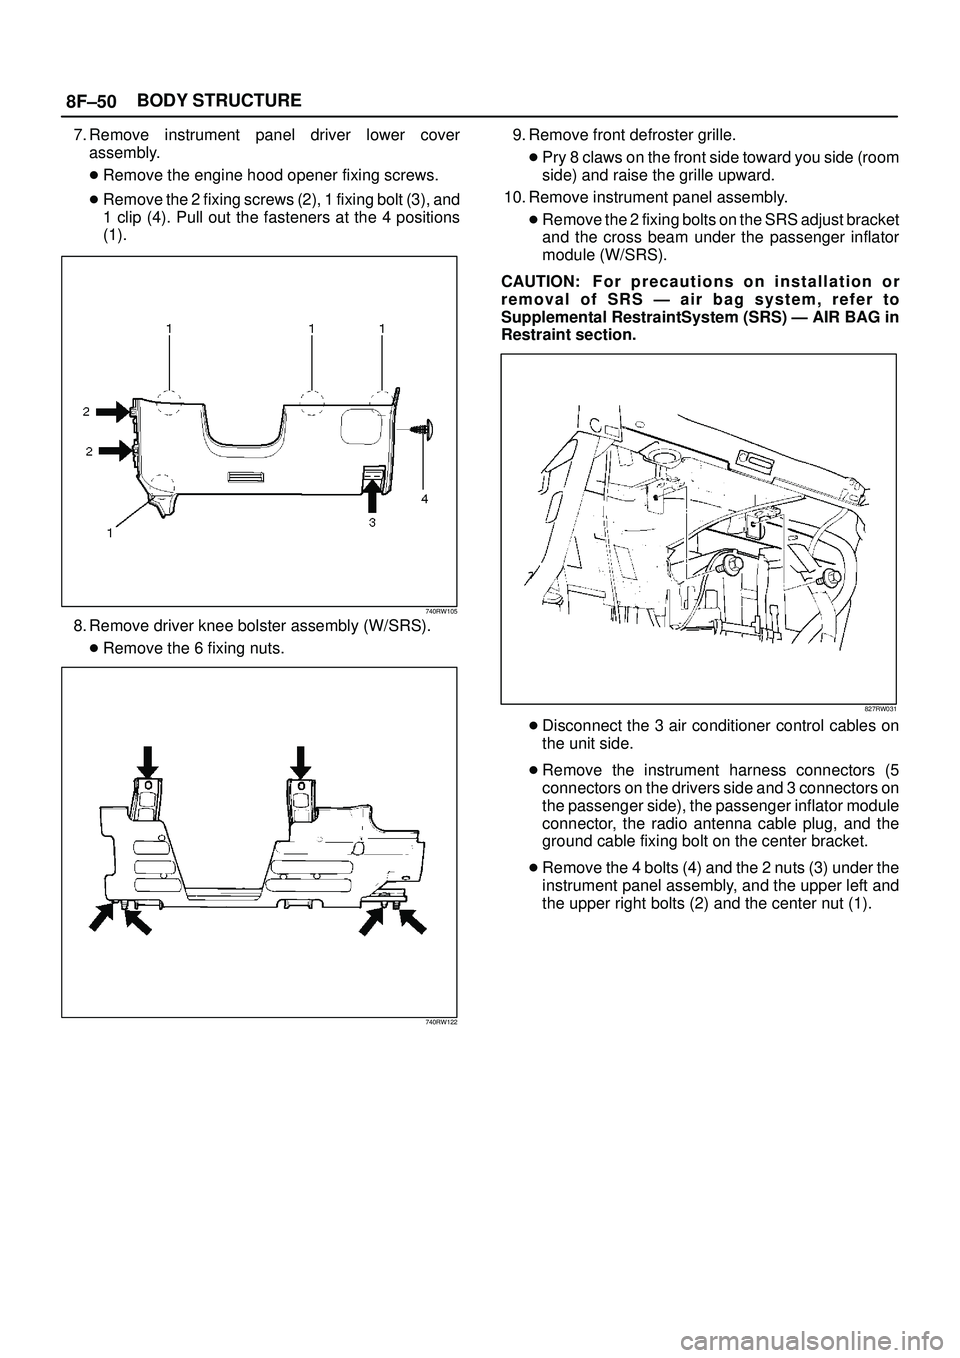 ISUZU TROOPER 1998  Service Repair Manual 8F±50BODY STRUCTURE
7. Remove instrument panel driver lower cover
assembly.
Remove the engine hood opener fixing screws.
Remove the 2 fixing screws (2), 1 fixing bolt (3), and
1 clip (4). Pull out 